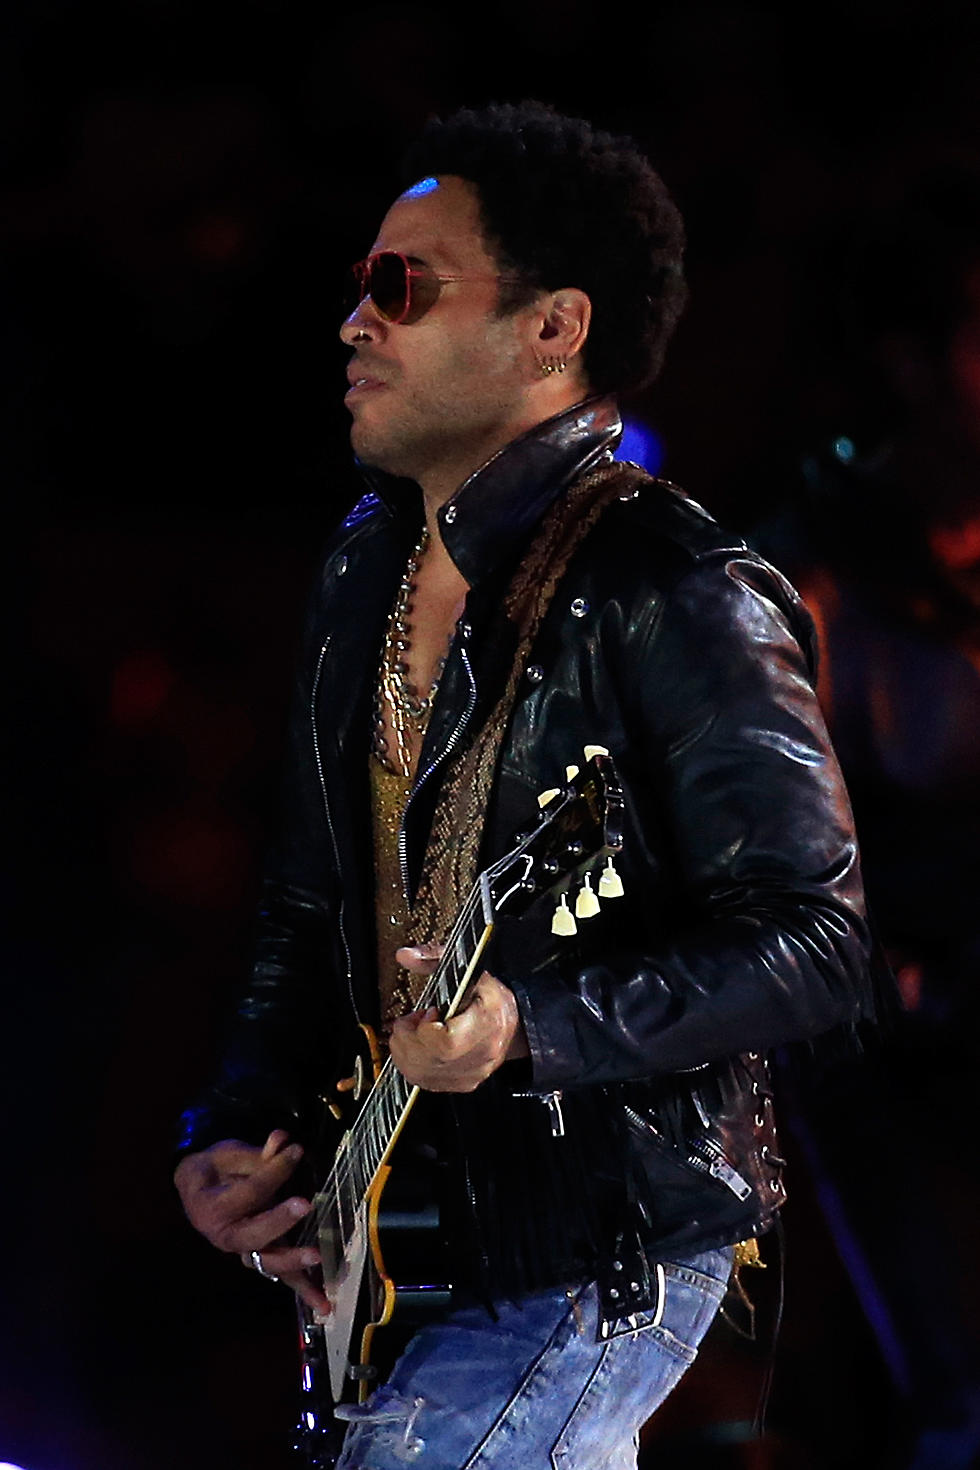 Lenny Kravitz Rips Pants Open On Stage. Yep, You See Everything. [NSFW]